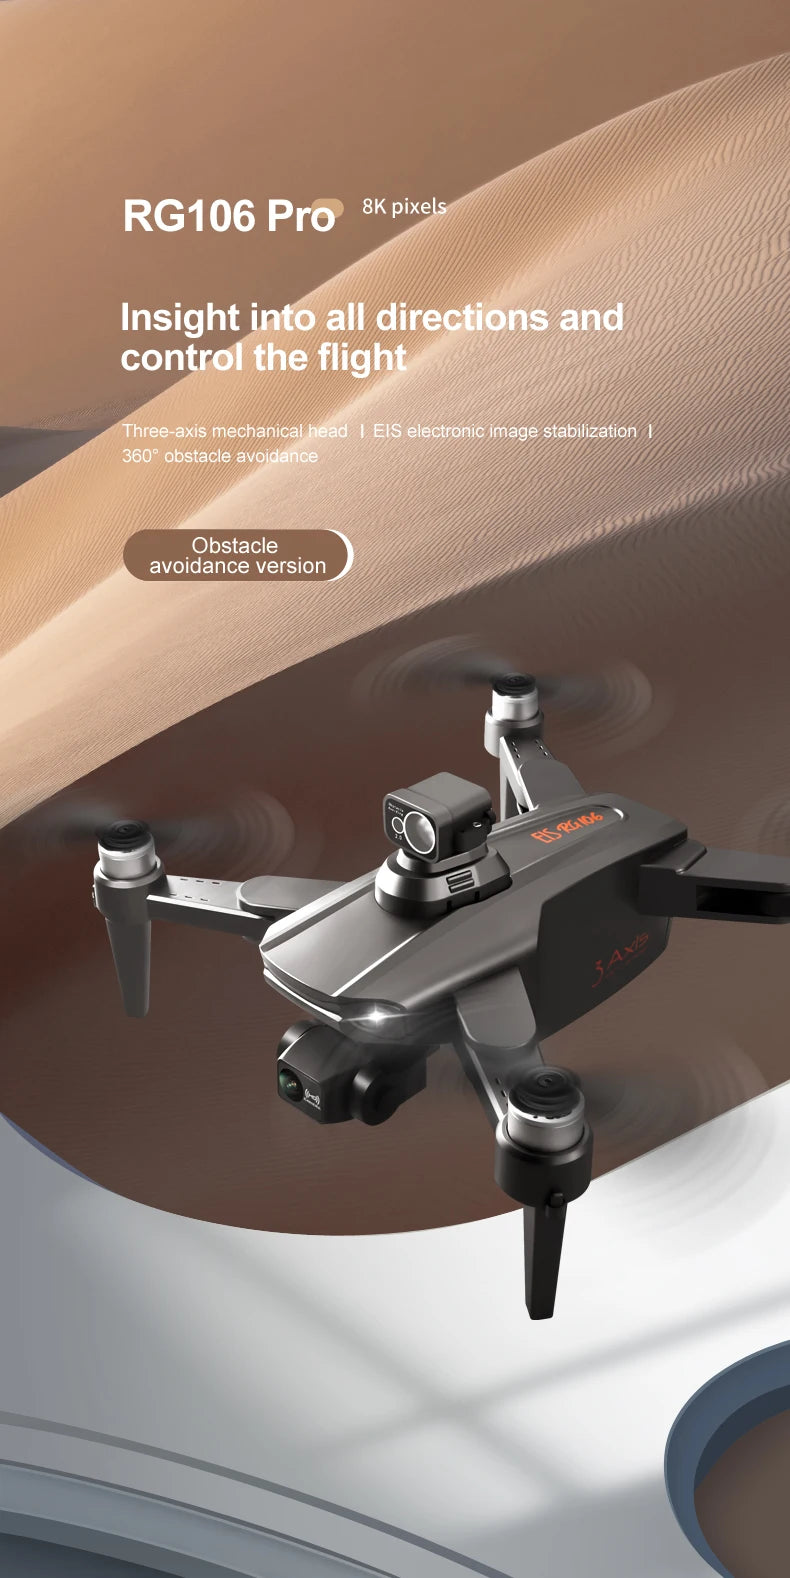 RG106 MAX Drone, RG106 Pro 8K pixels Insight into all directions and control the flight .